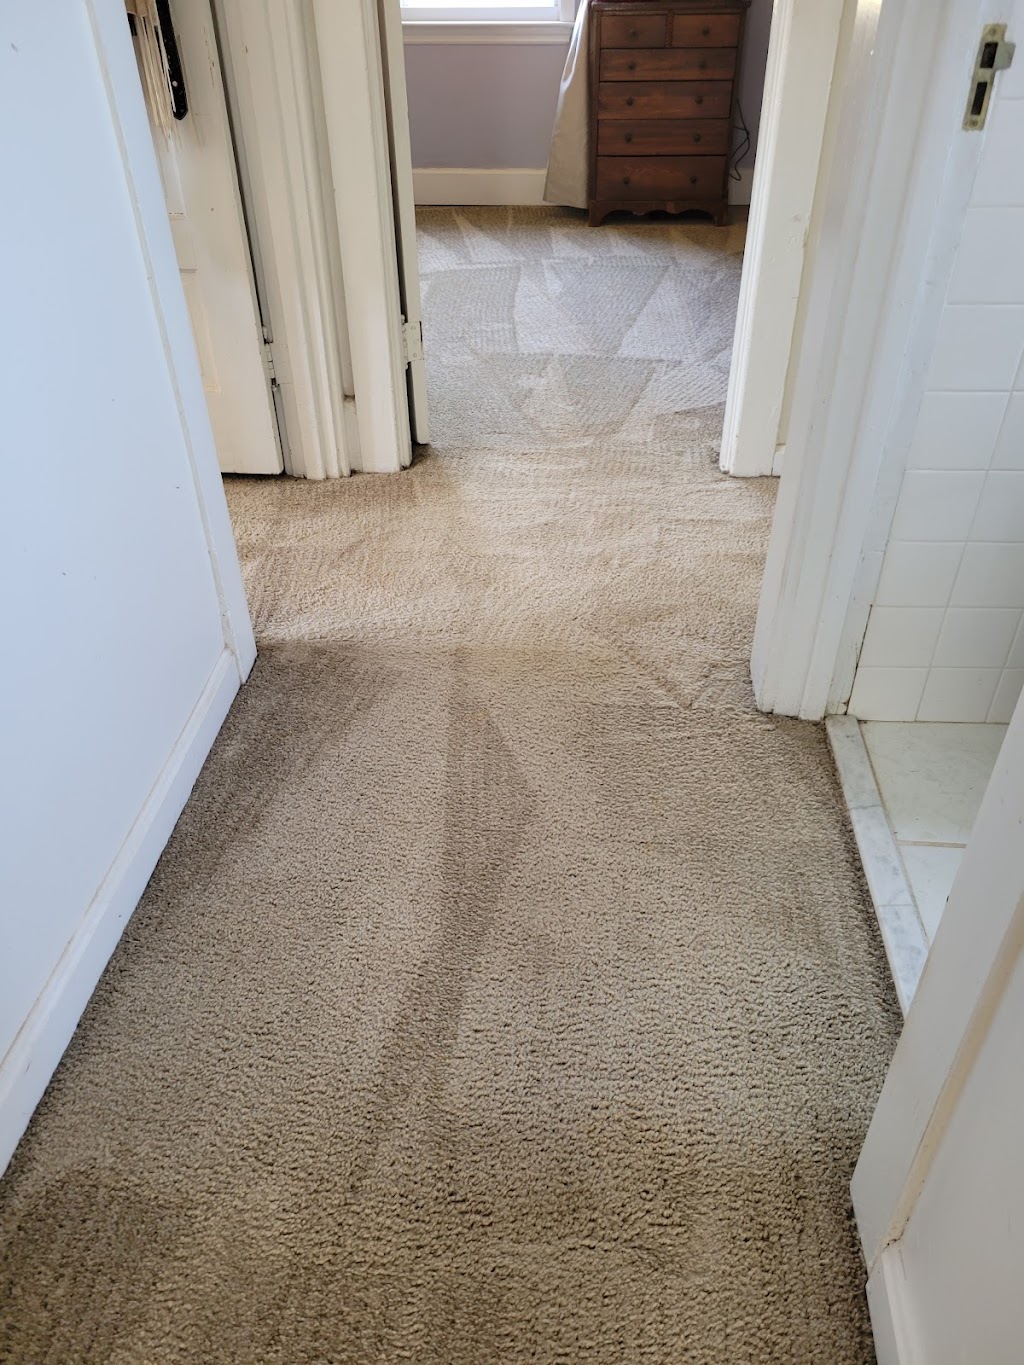 Bio-Clean Carpet Cleaning | 21 W 4th St, Pottstown, PA 19464 | Phone: (484) 253-6400